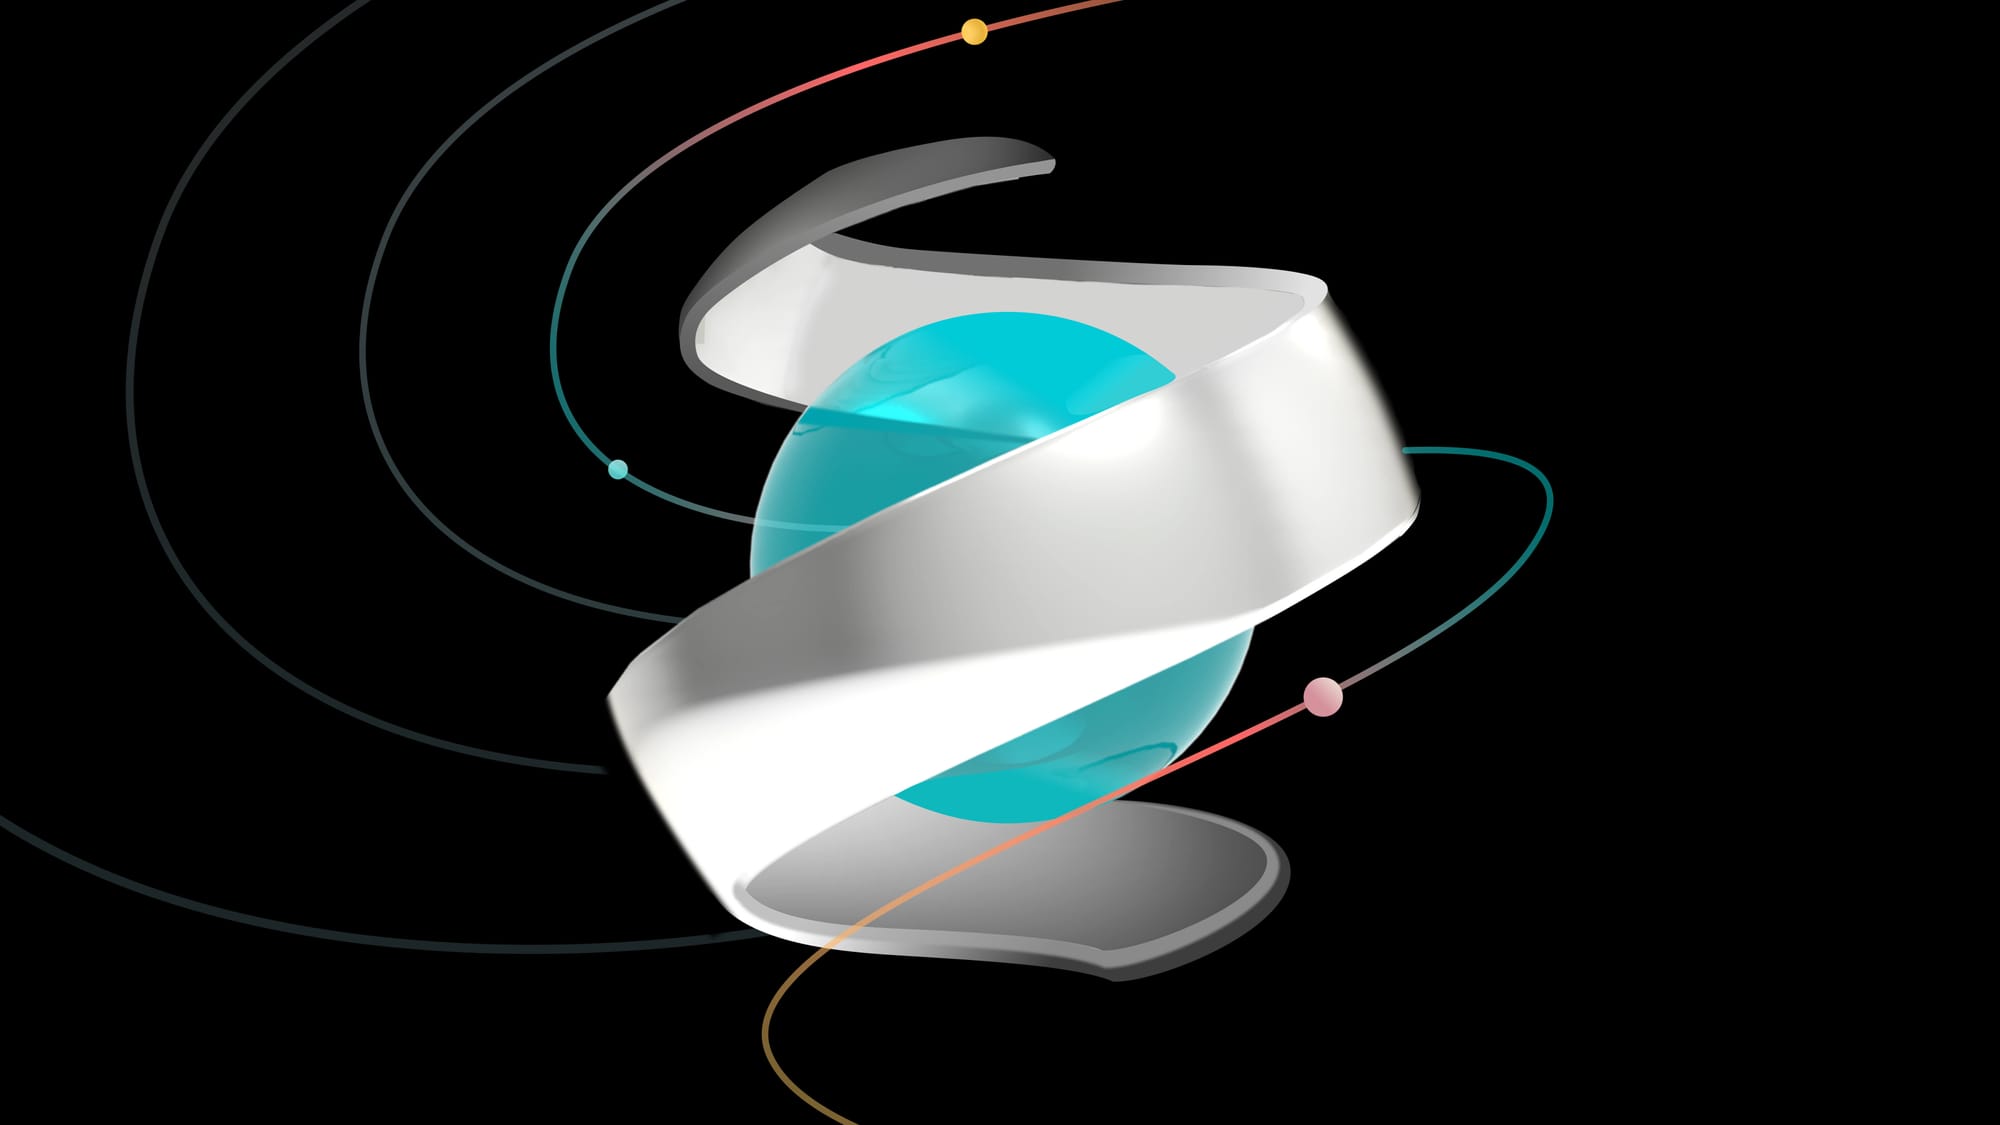 Artistic 3D illustration of a white spiral with a blue core, surrounded by red and pink orbits on a black background.